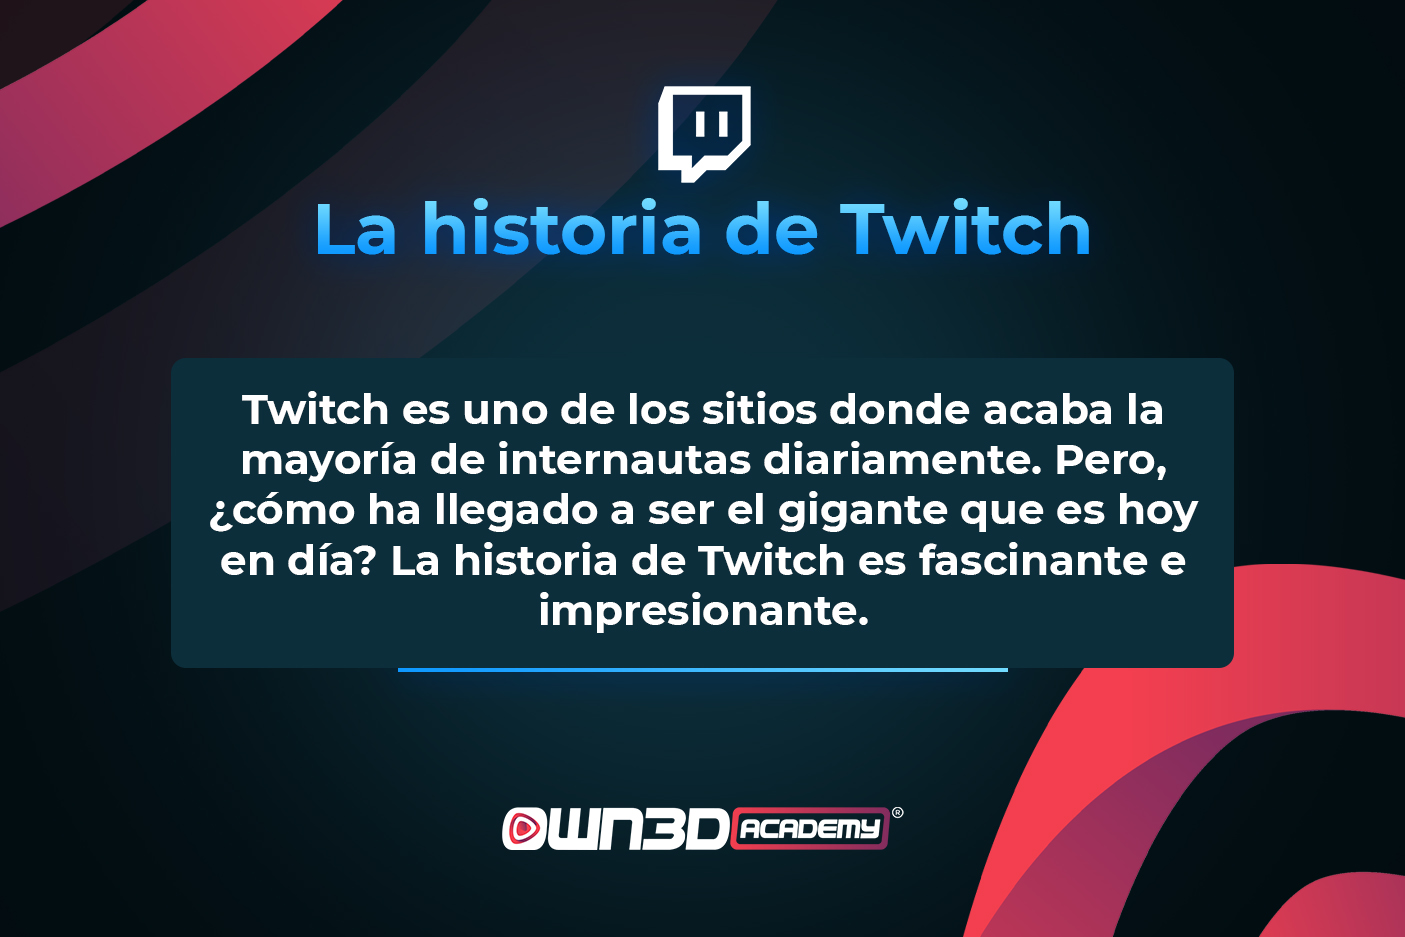 ES_L2_TWITCH_History-and-Keyfacts_twitch-history.jpg